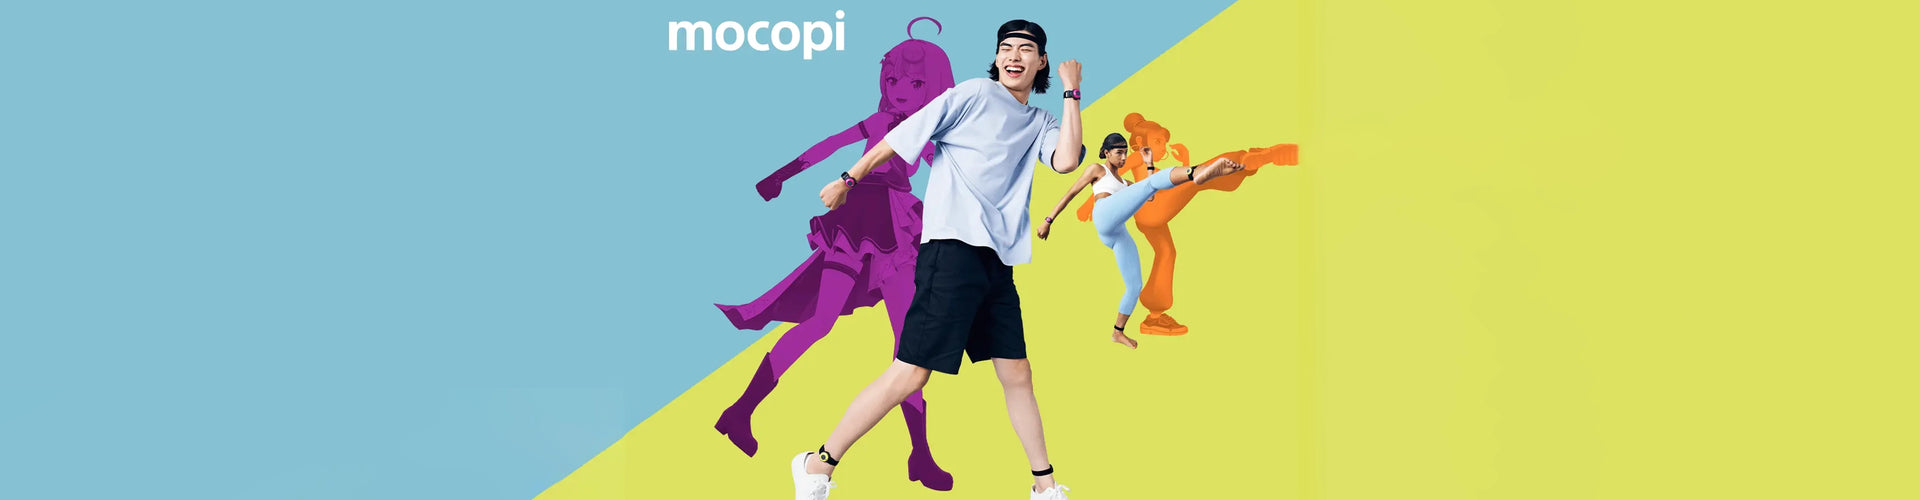 Sony Mocopi in the US: A New Dimension in VR Motion Capture